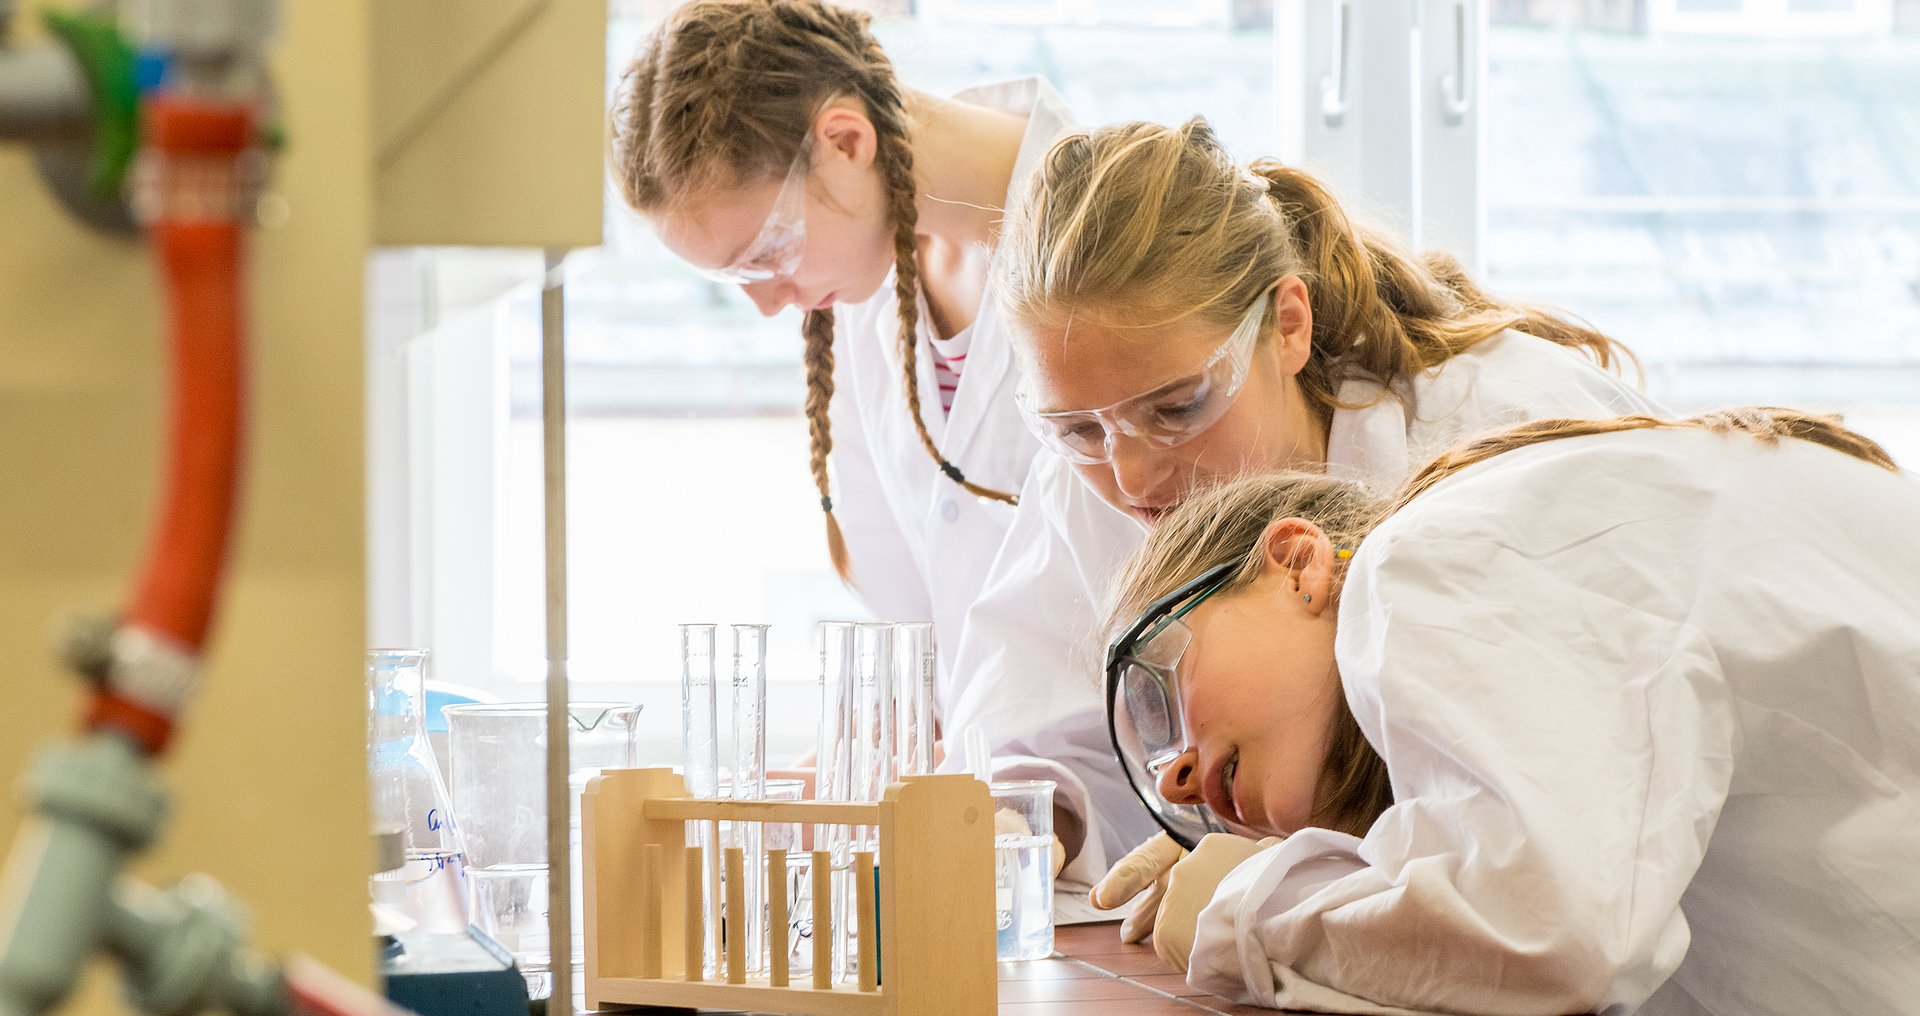 Three girls experimenting in the chemistry lab.